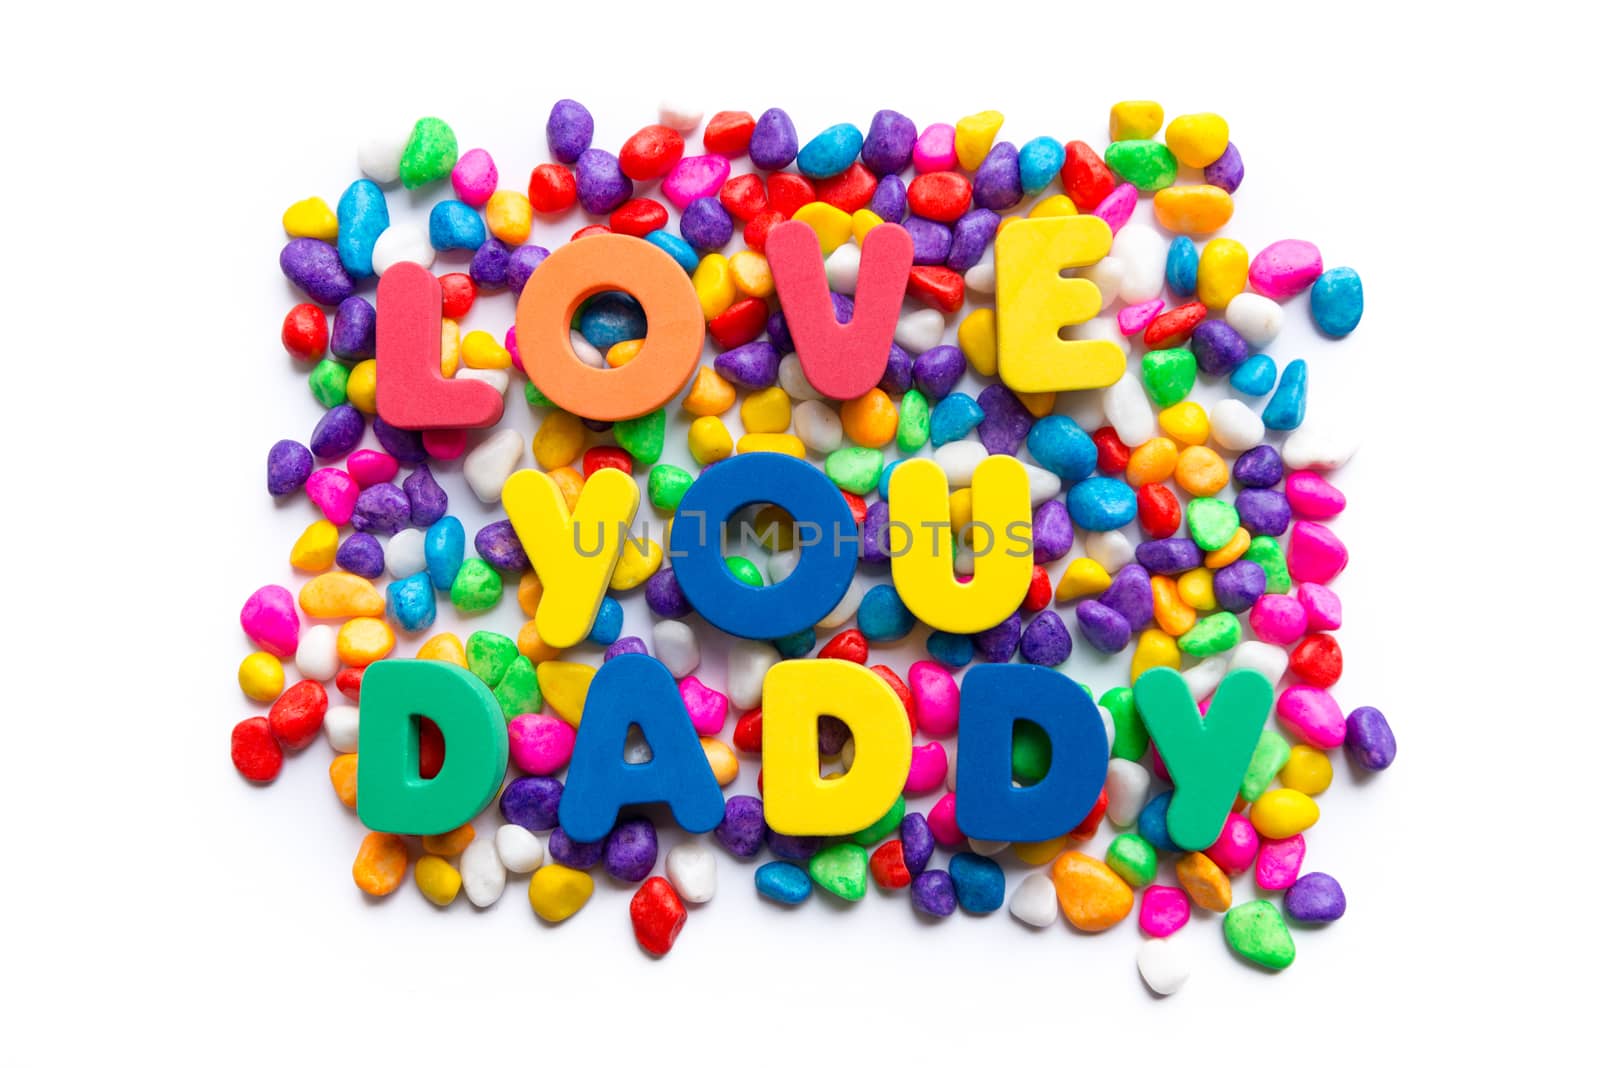 love you daddy words in colorful stones